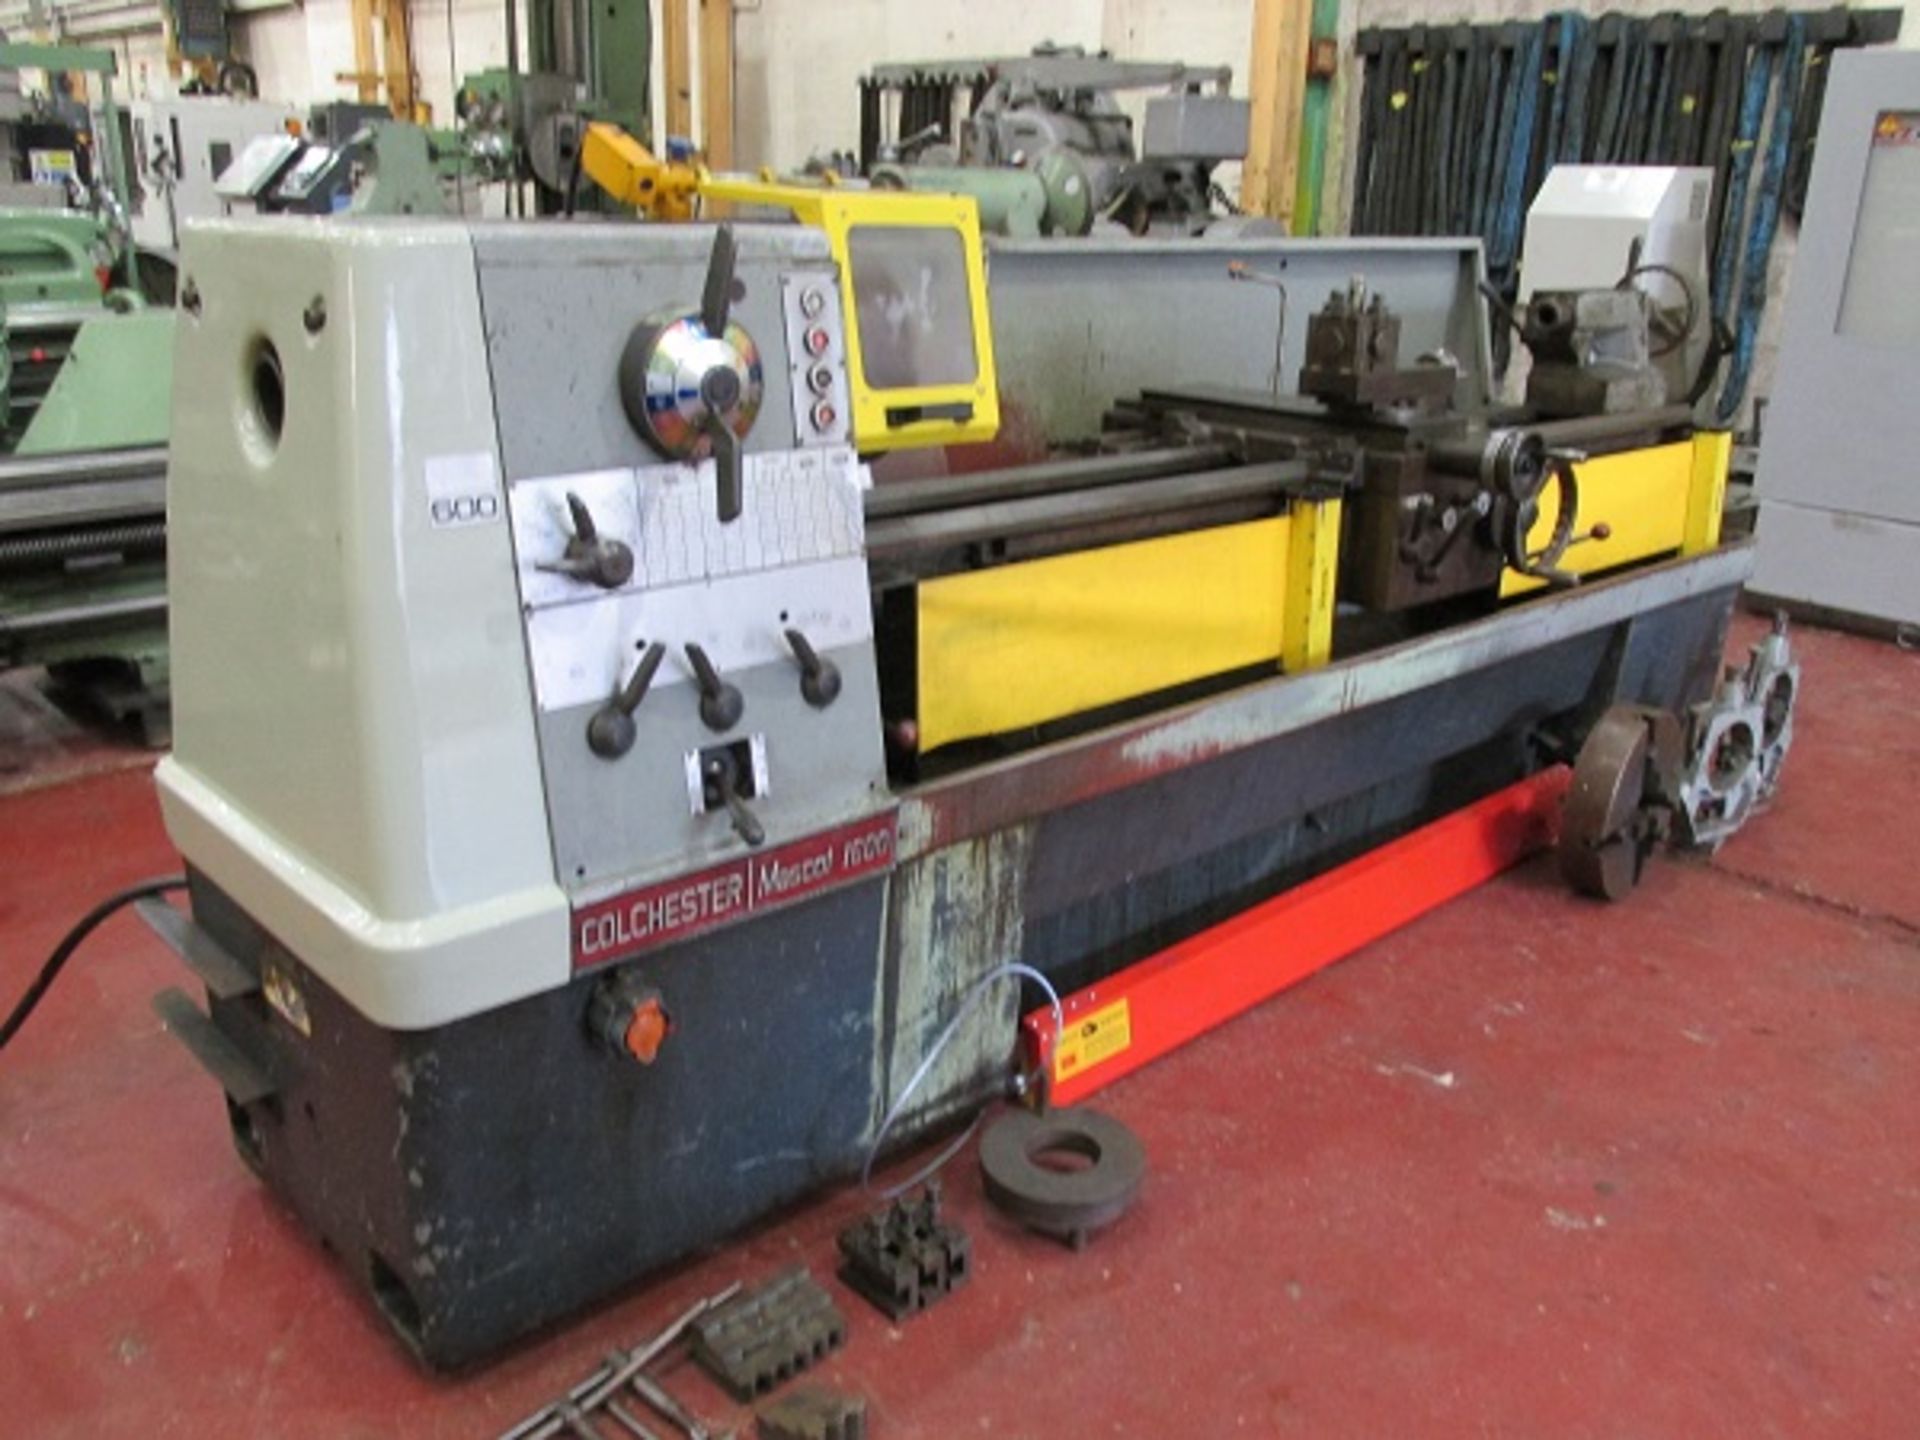 Colchester Mascot 1600 Gap Bed Lathe x 2000mm - Image 2 of 7